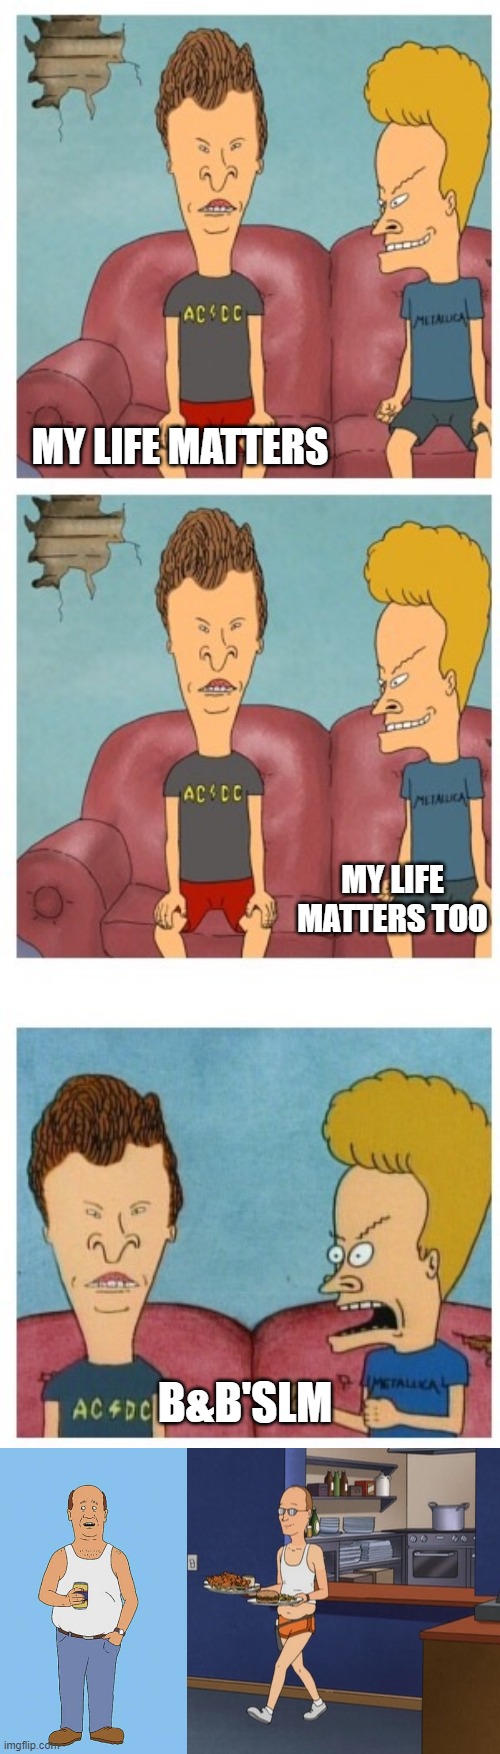 MY LIFE MATTERS; MY LIFE MATTERS TOO; B&B'SLM | image tagged in beavis and butthead,king of the hill bill,dale gribble,funny,funny memes | made w/ Imgflip meme maker